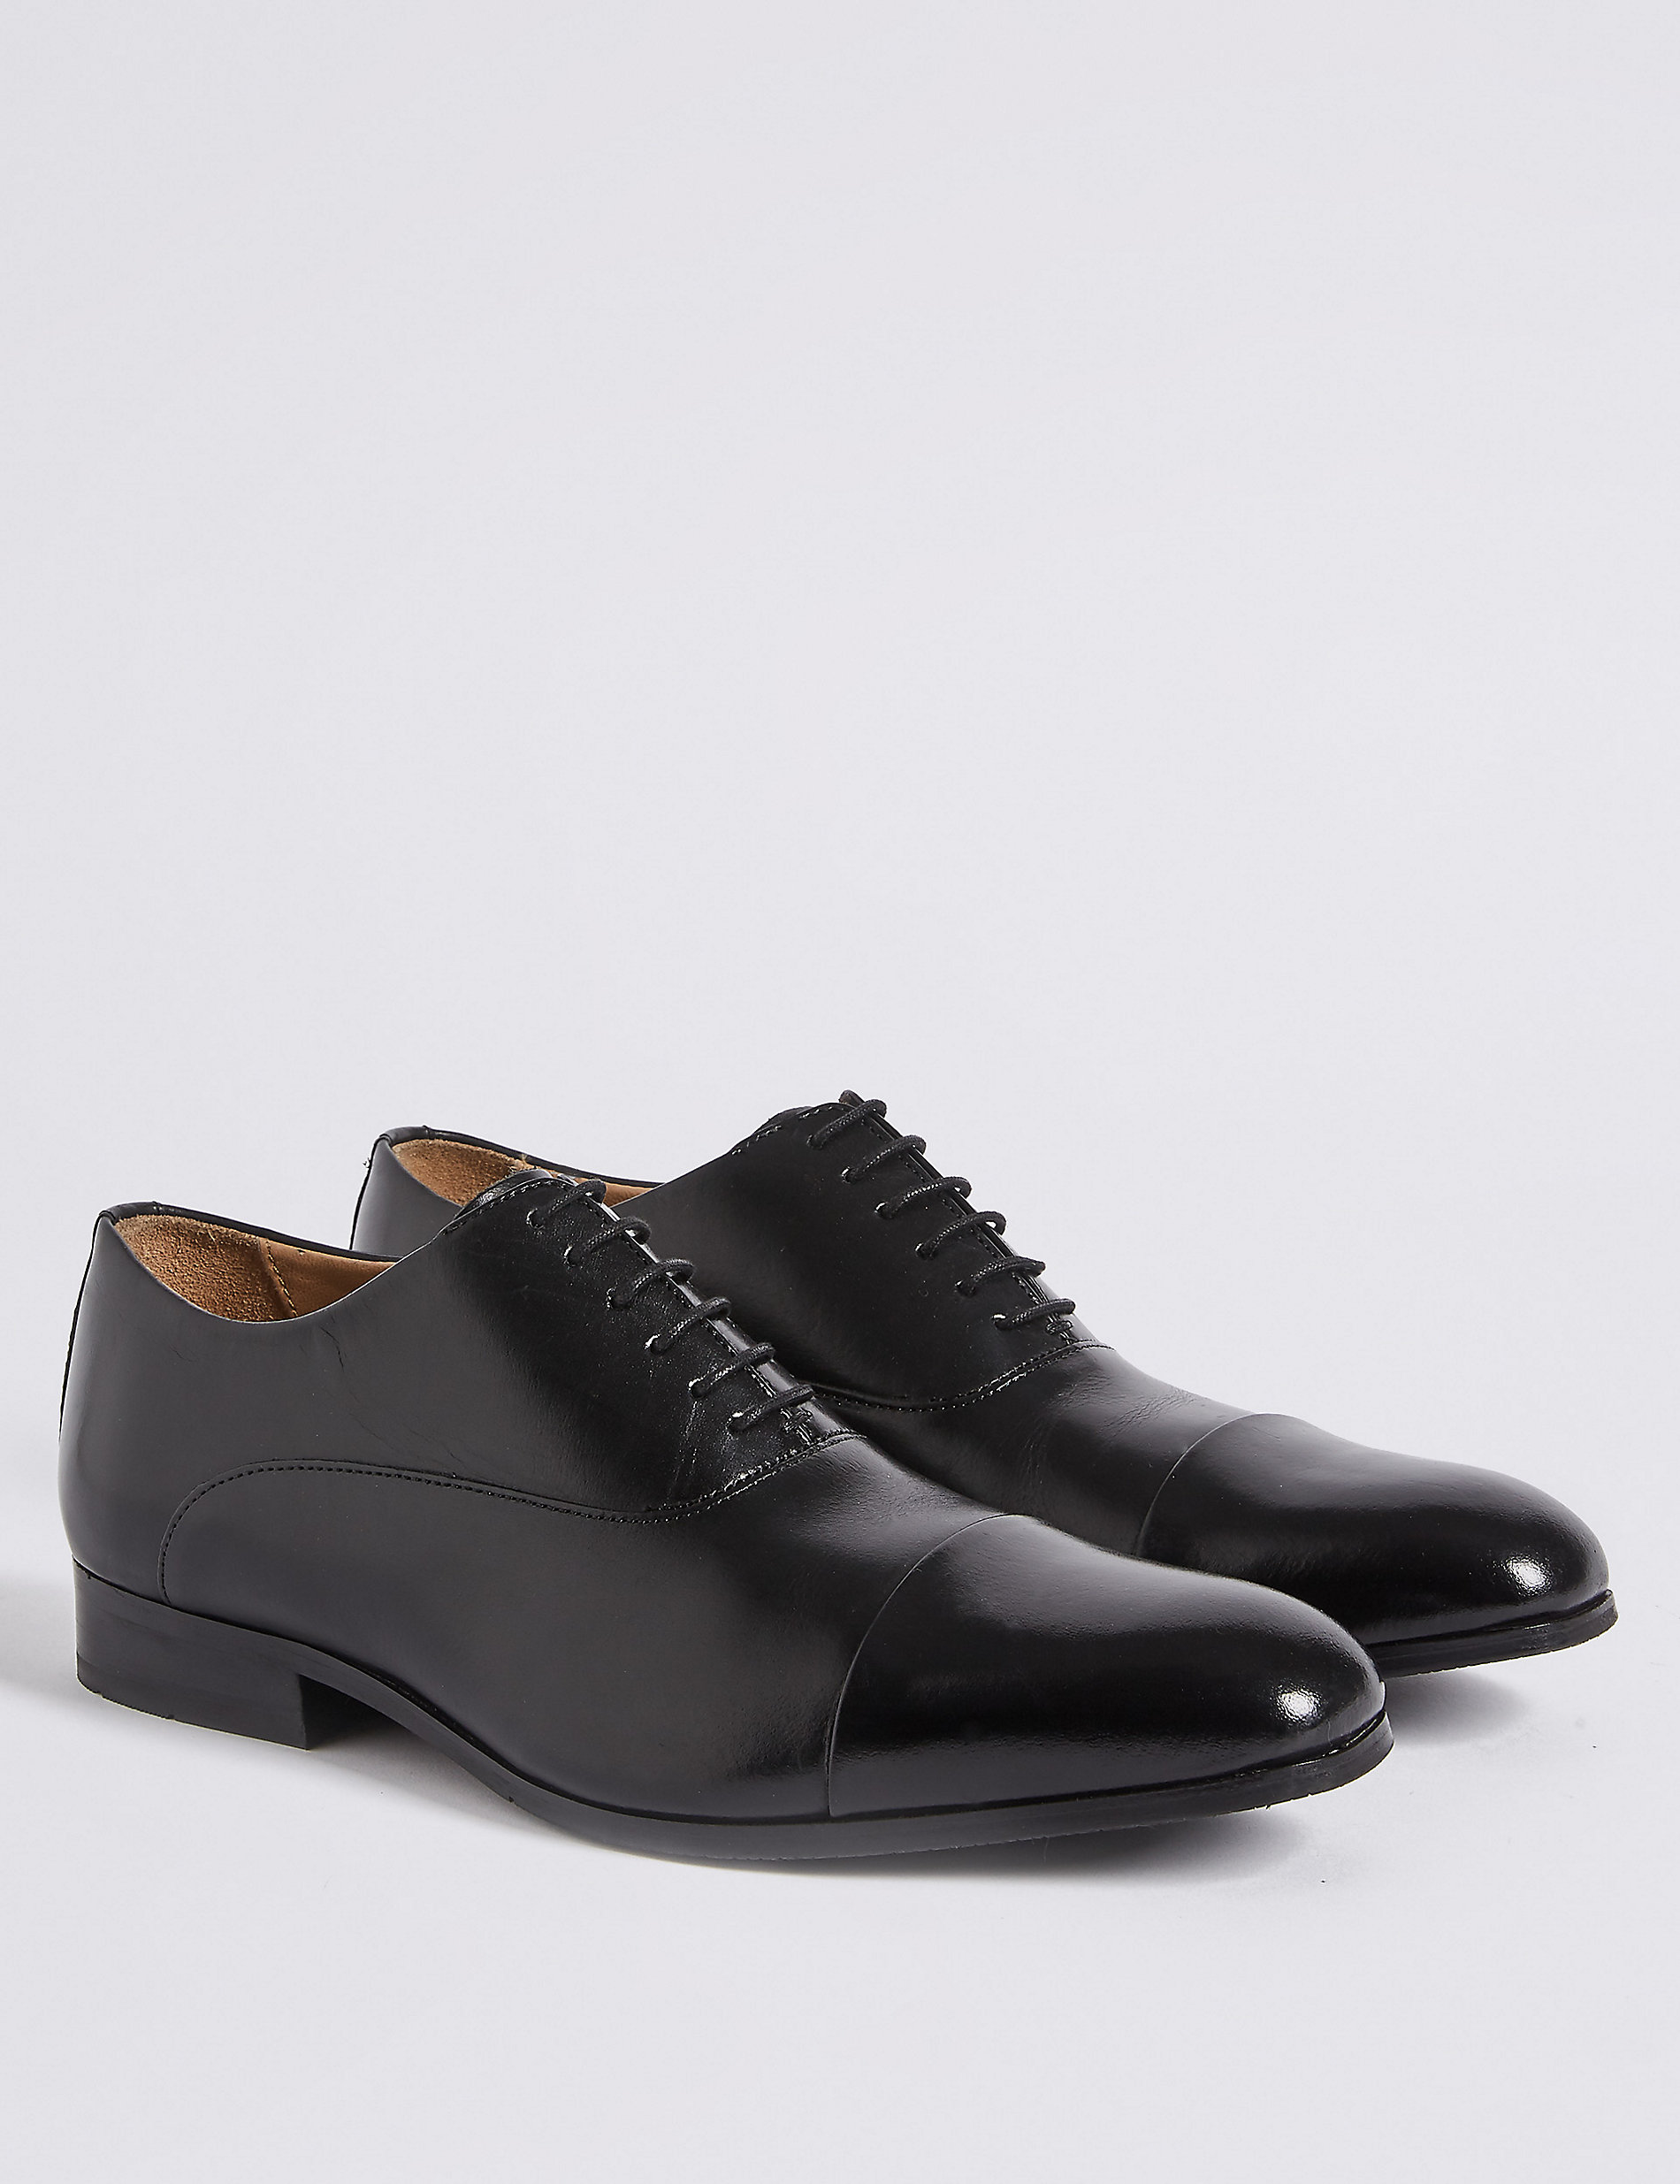 Wide Fit Leather Oxford Shoes